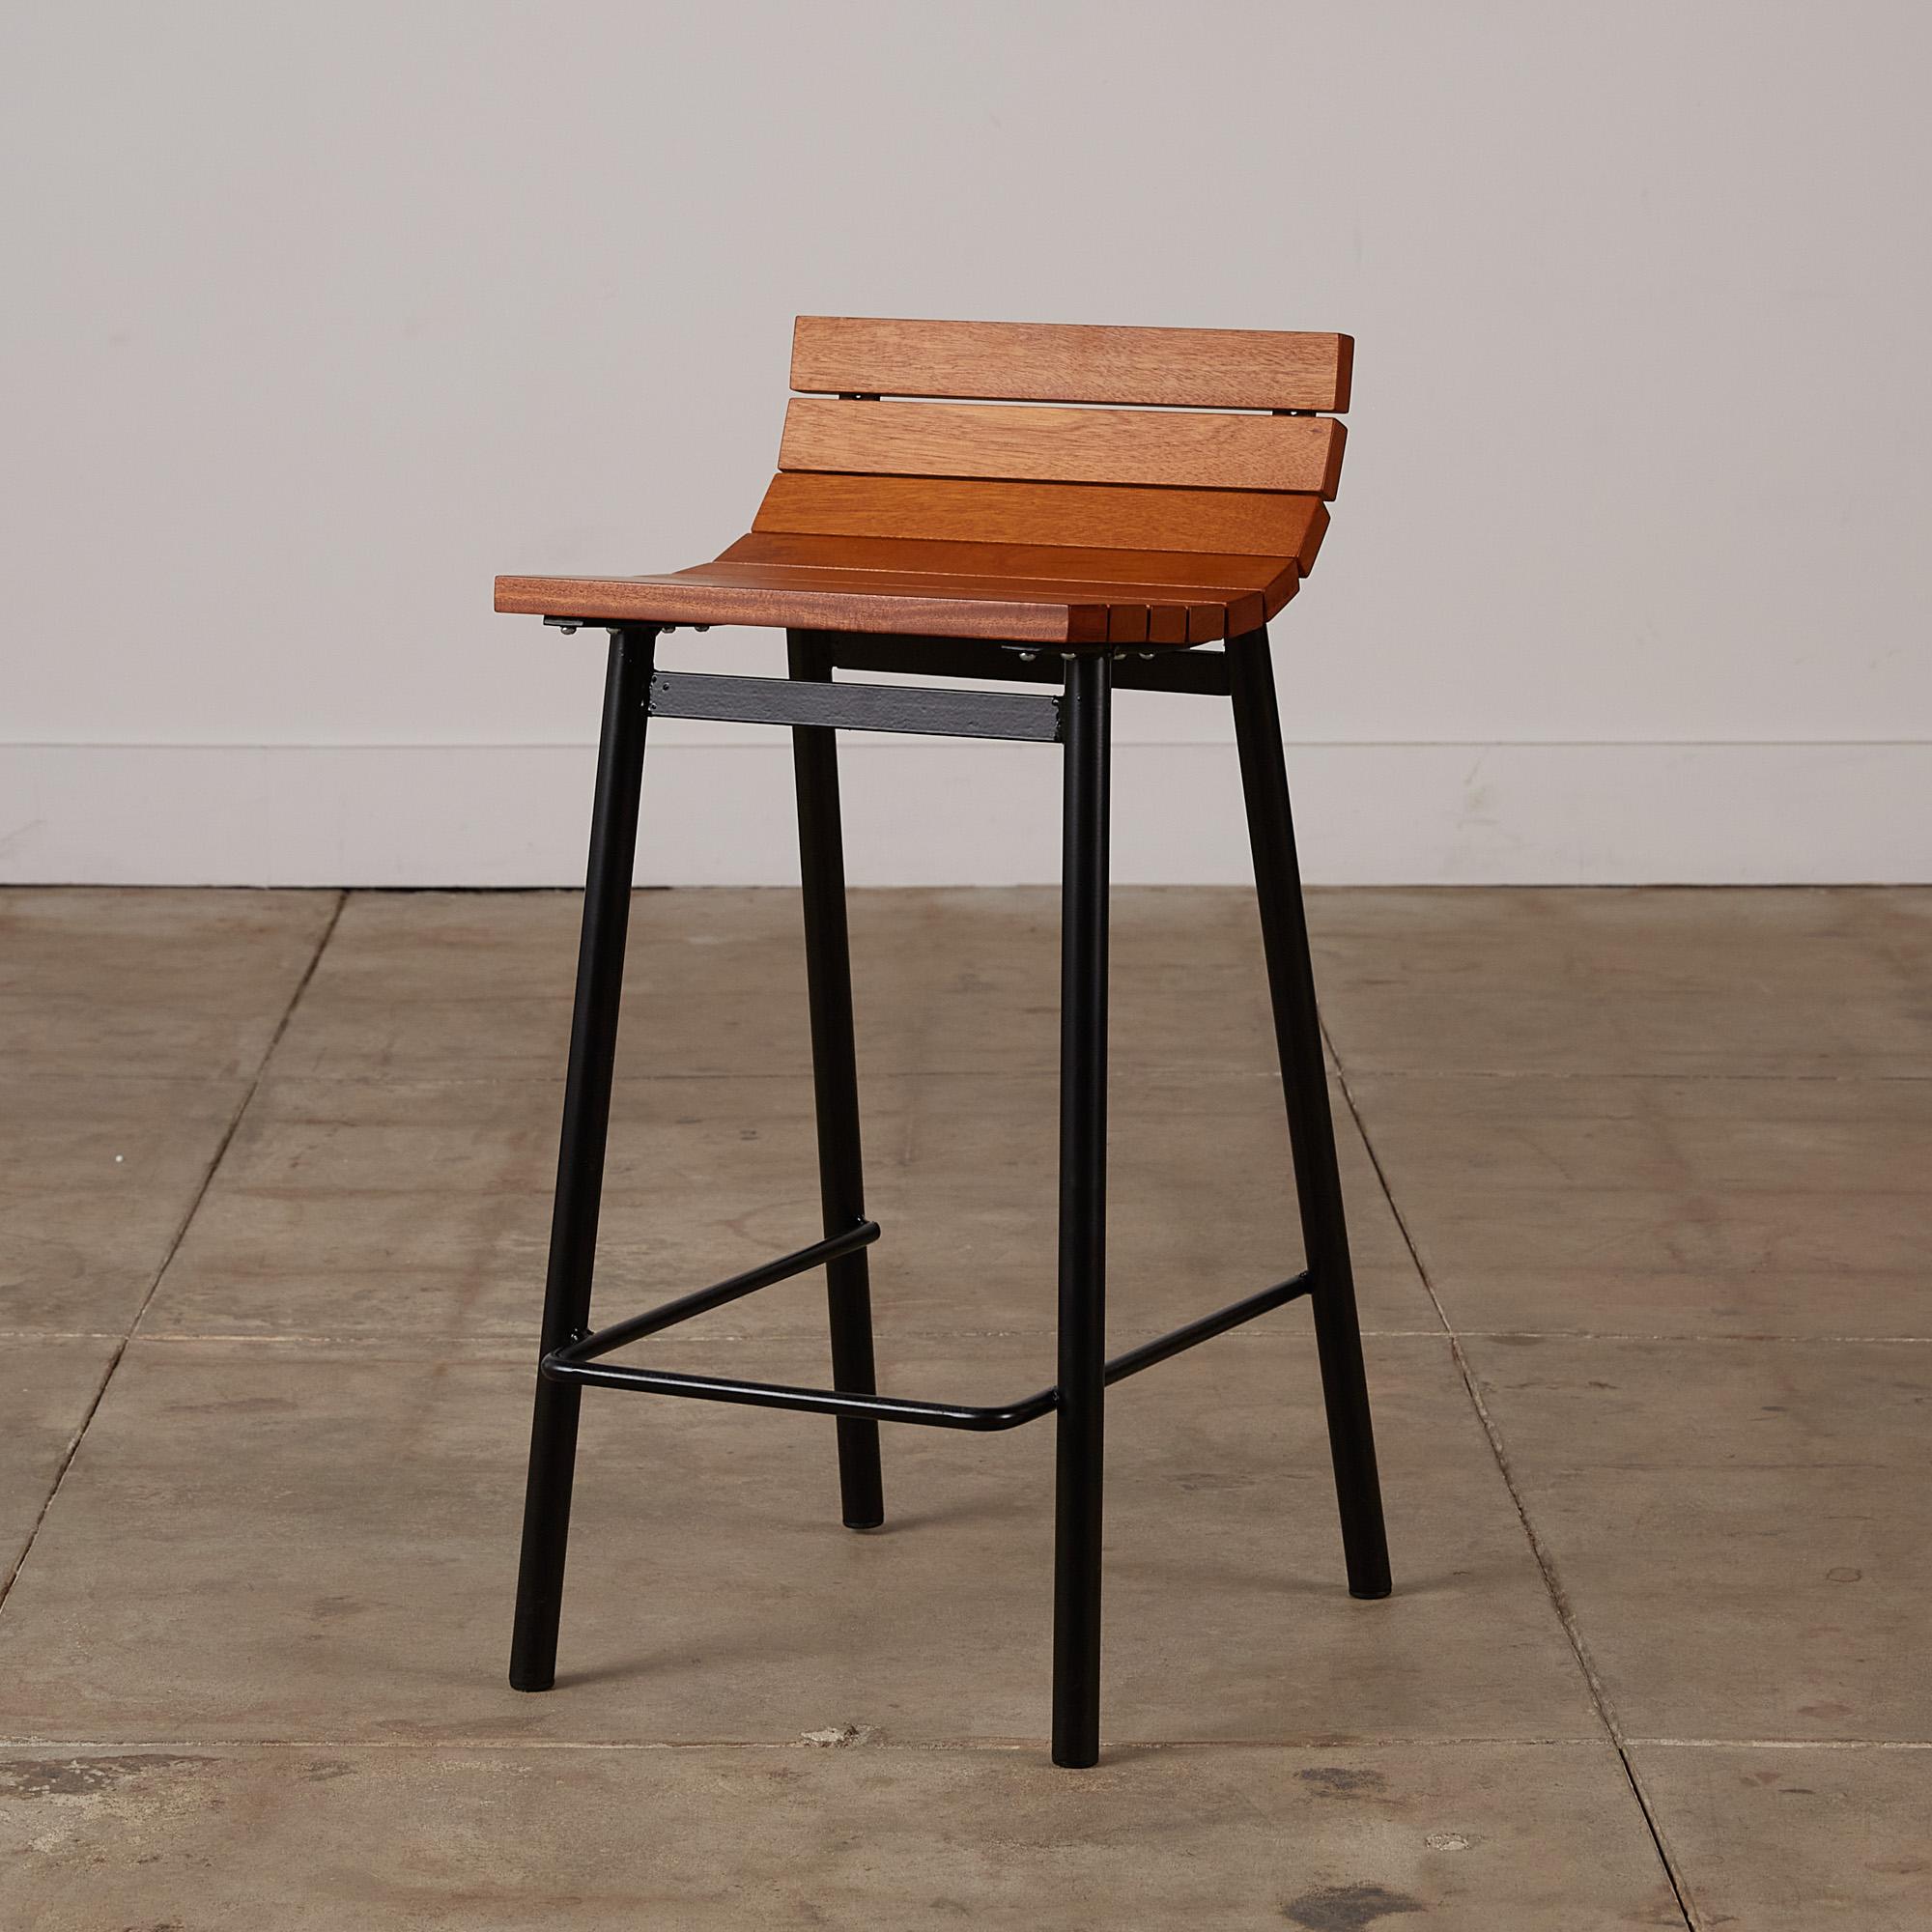 Counter stool by Vista of California, circa 1950s. This counter height stool features a newly powder coated tubular steel frame with a thinner strip of steel tubing serving as a mid-height structural support as well as a footrest. The stool also